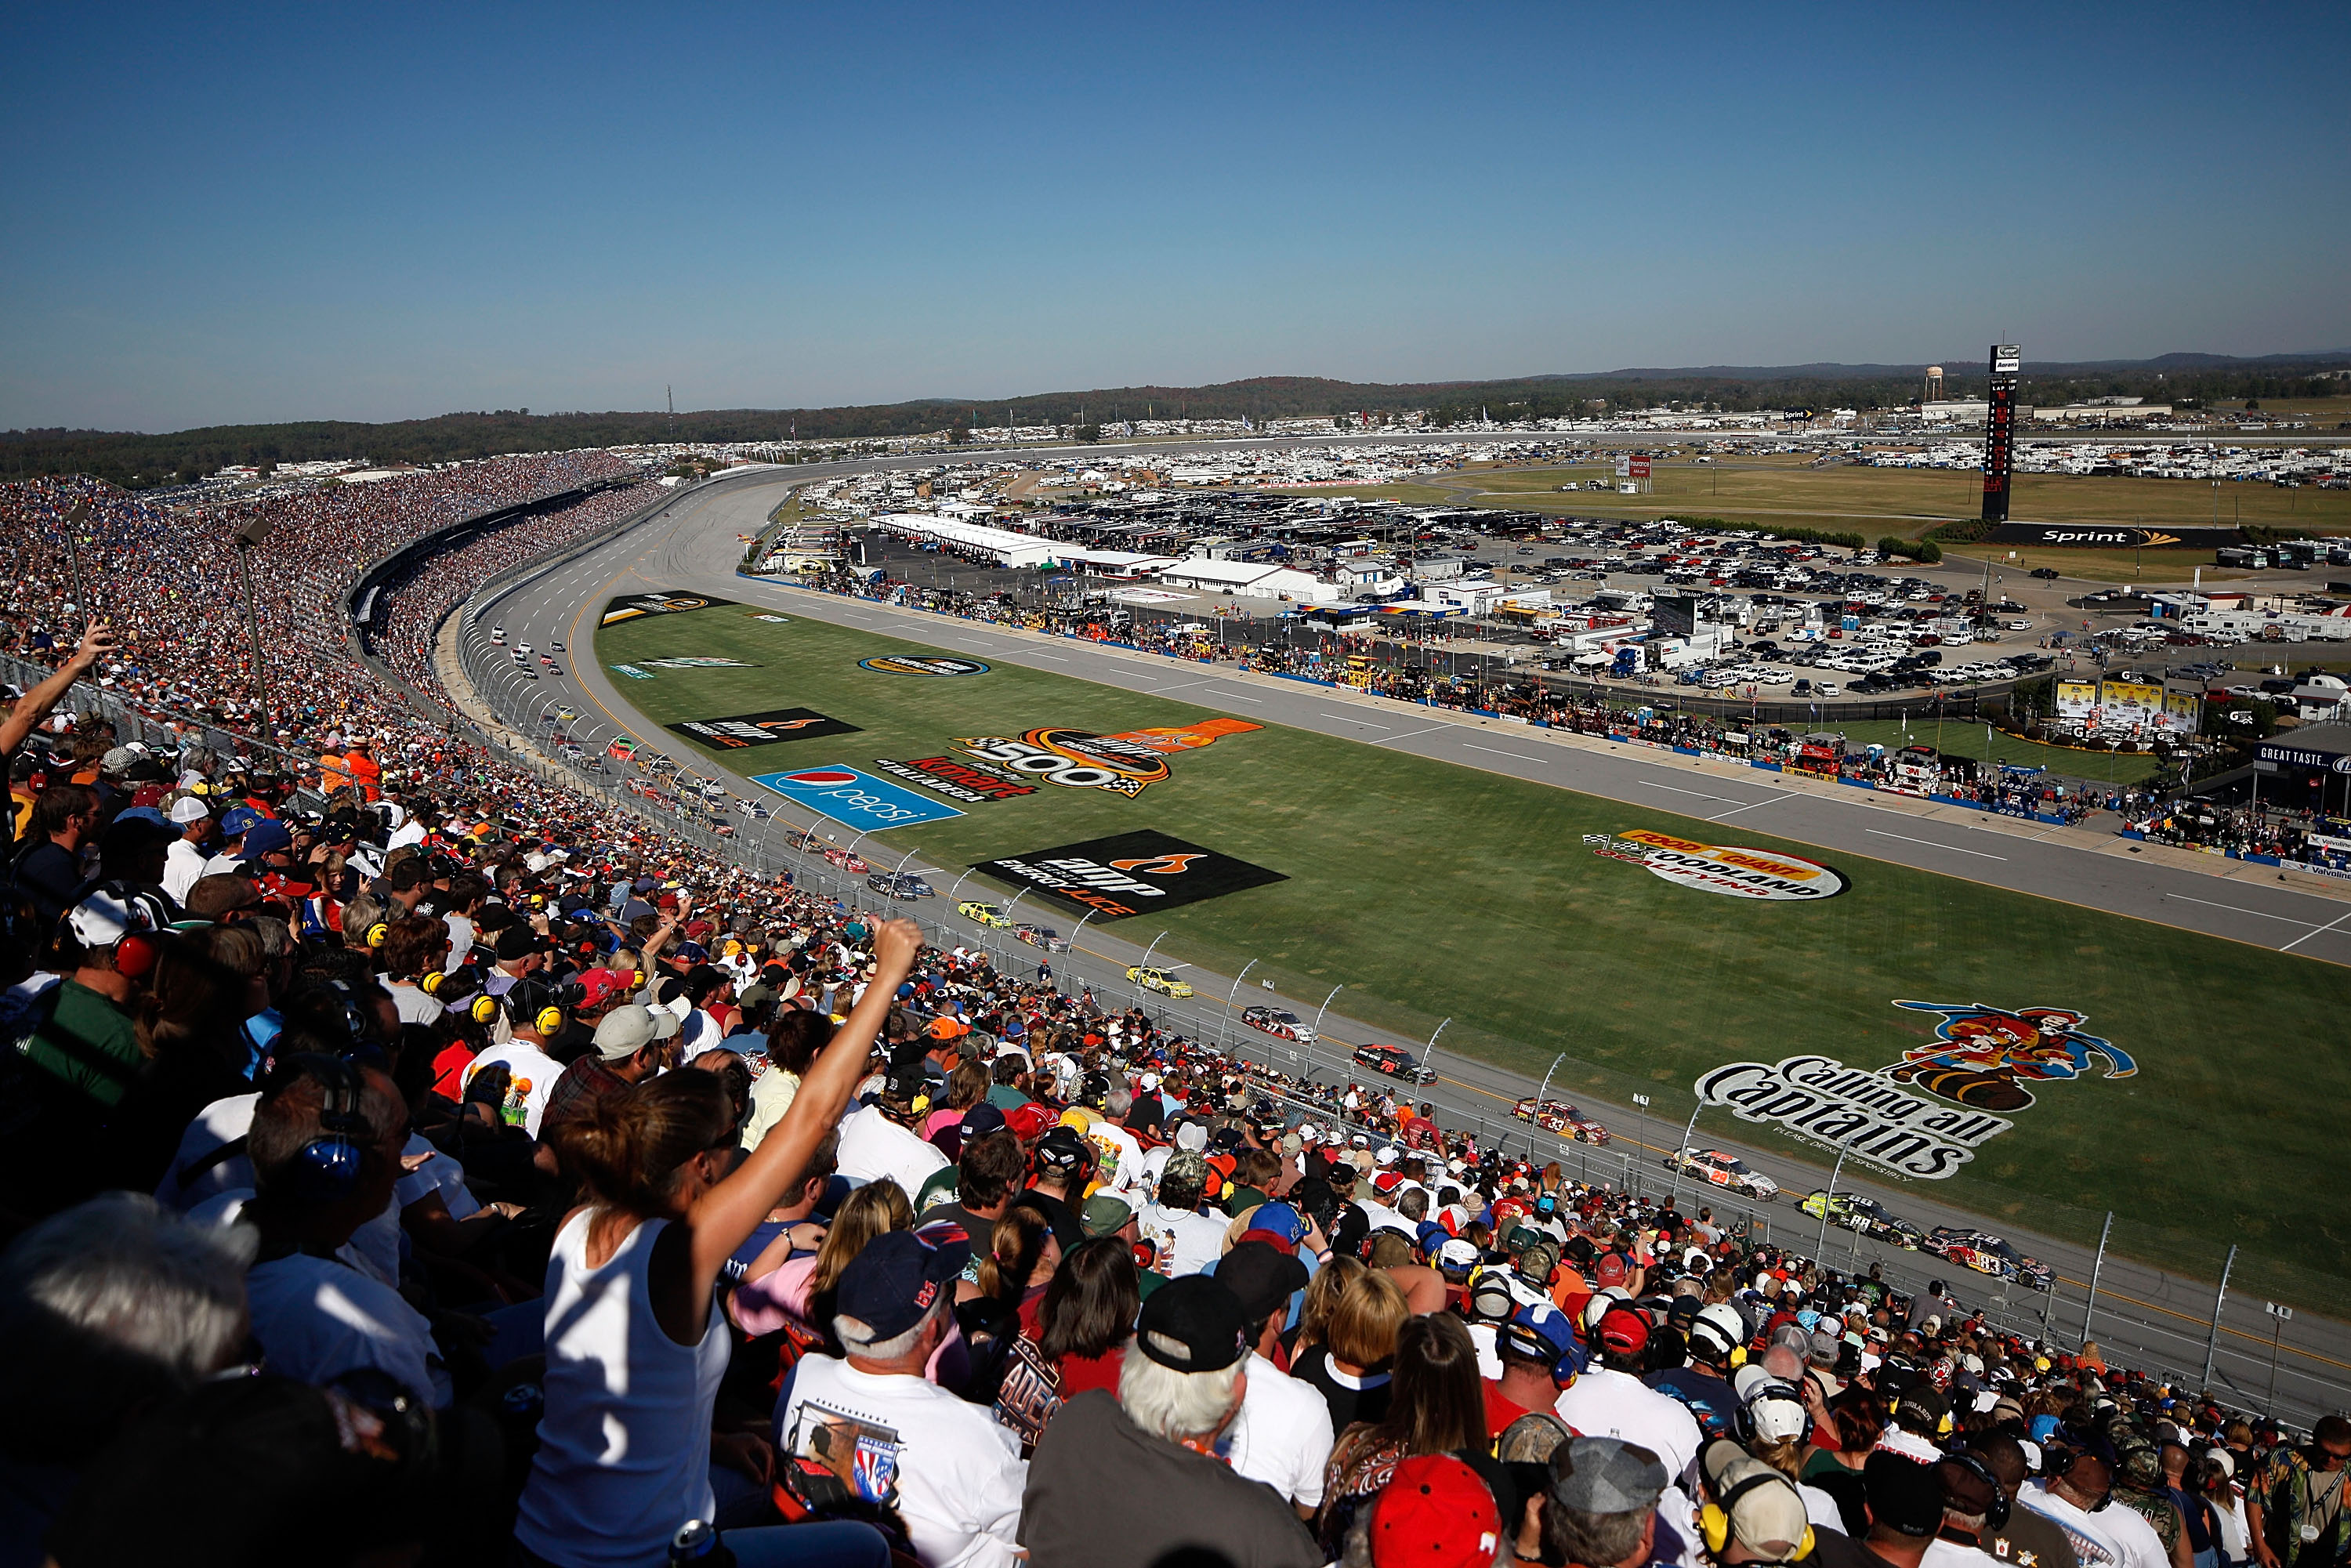 TALLADEGA, AL - OCTOBER 31:  A general view of cars racing during the NASCAR Sprint Cup Series AMP Energy Juice 500 at Talladega Superspeedway on October 31, 2010 in Talladega, Alabama.  (Photo by Chris Graythen/Getty Images)